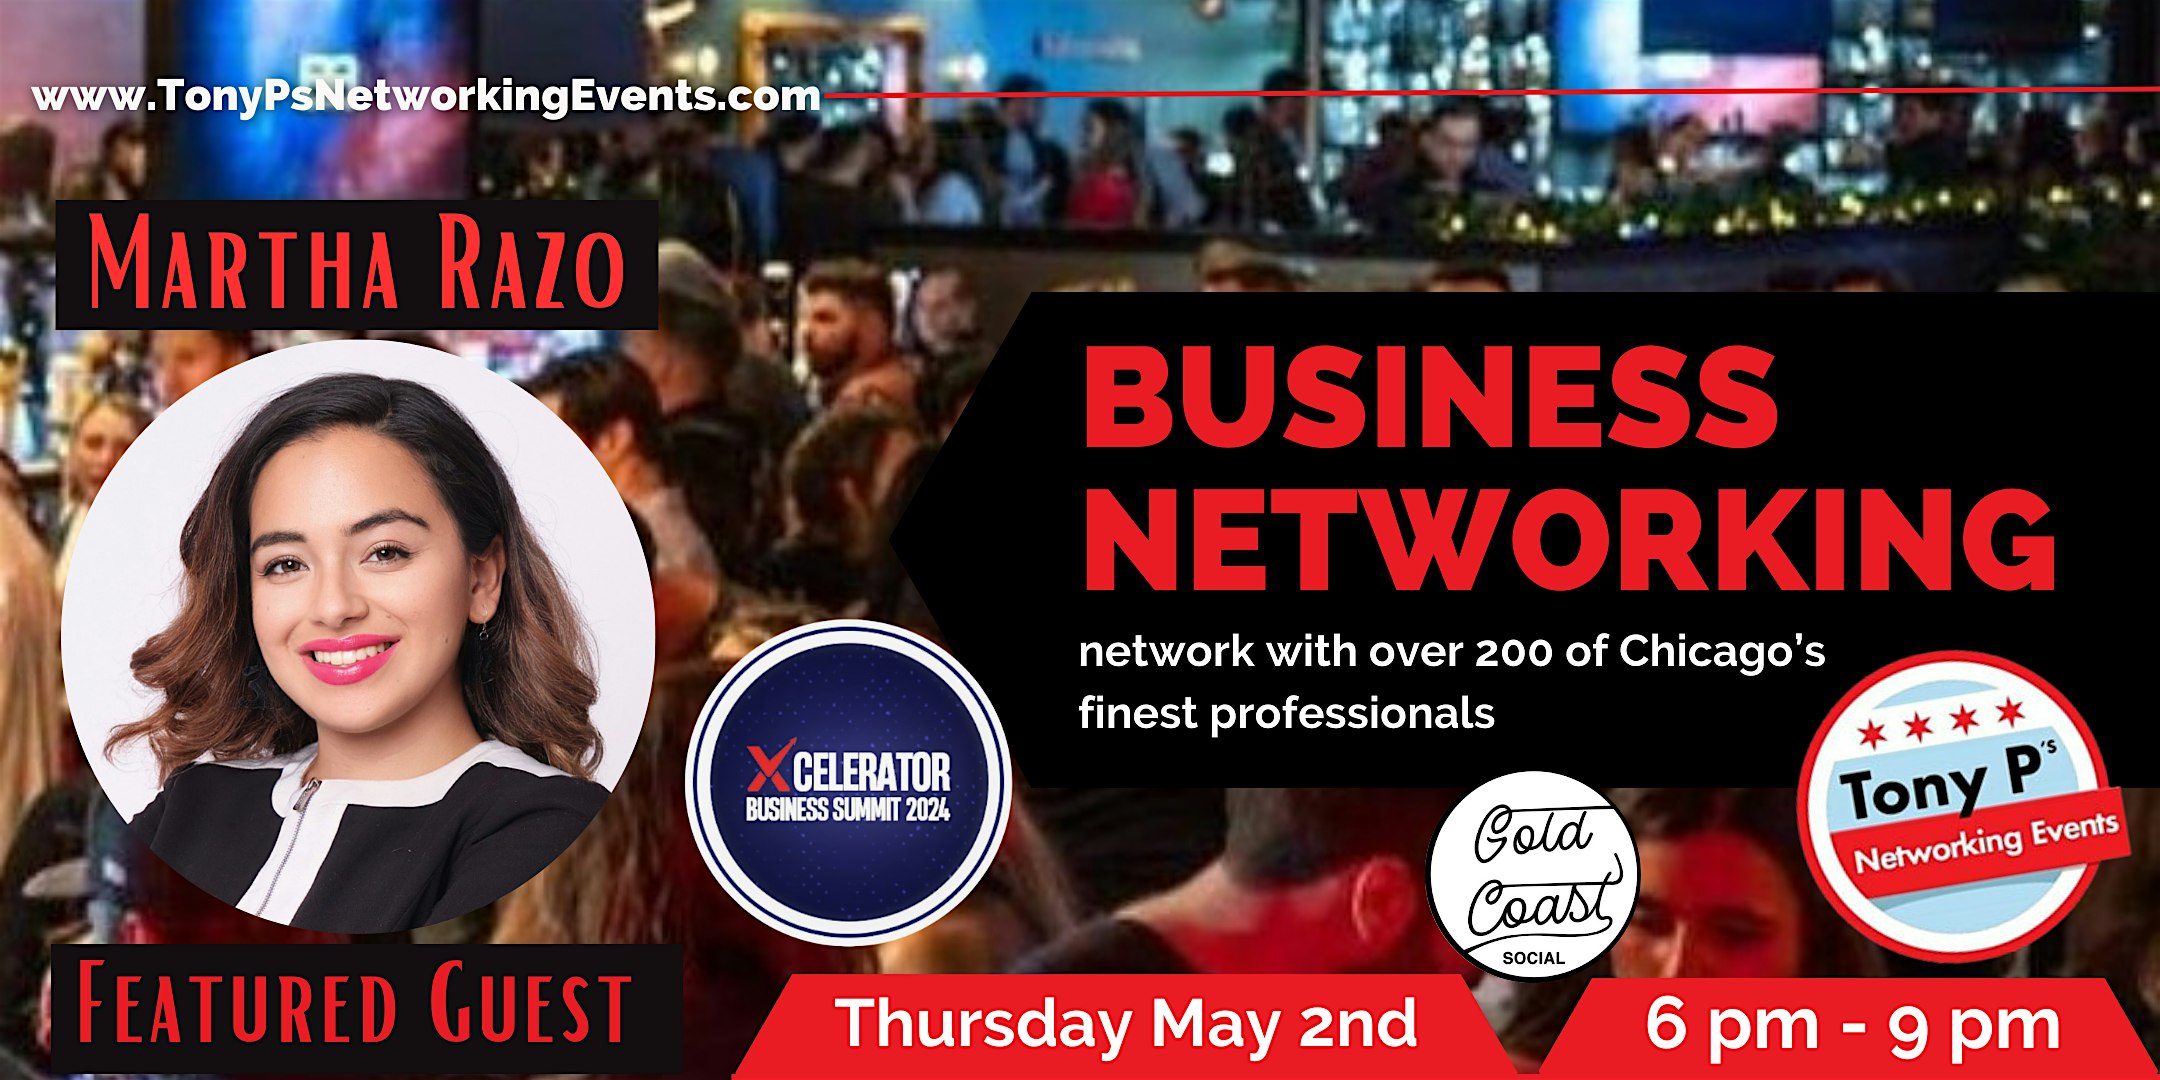 Tony P’s May Business Networking Event at Gold Coast Social: Thurs May 2nd